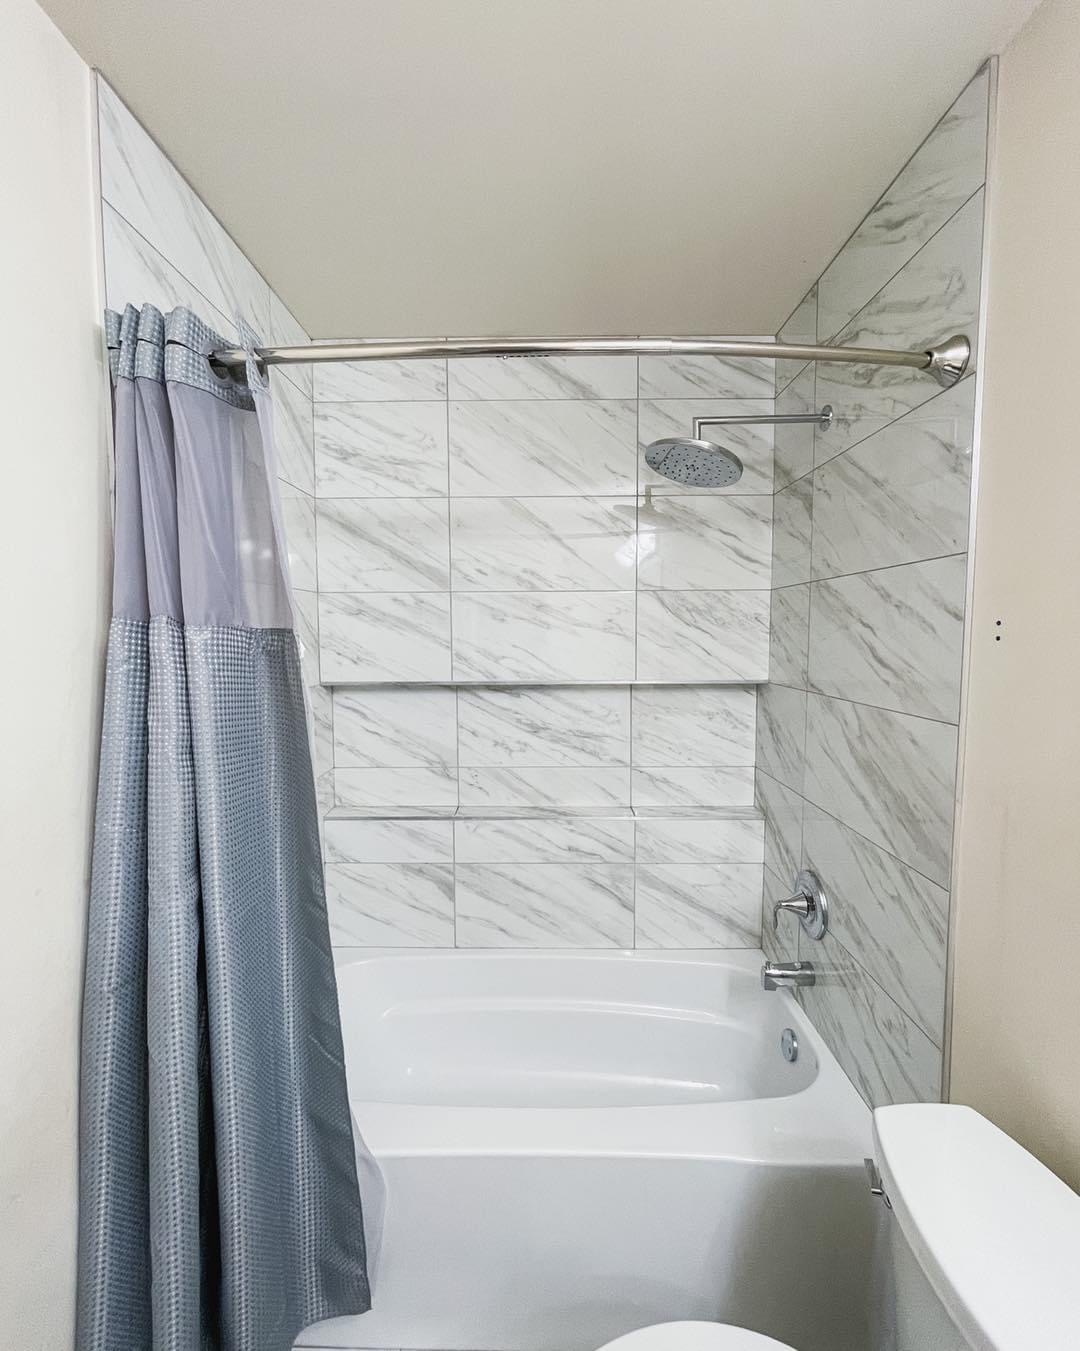 We are renovation specialists who create functional and stylish bathroom renovations, transforming your home and enhancing your quality of life.